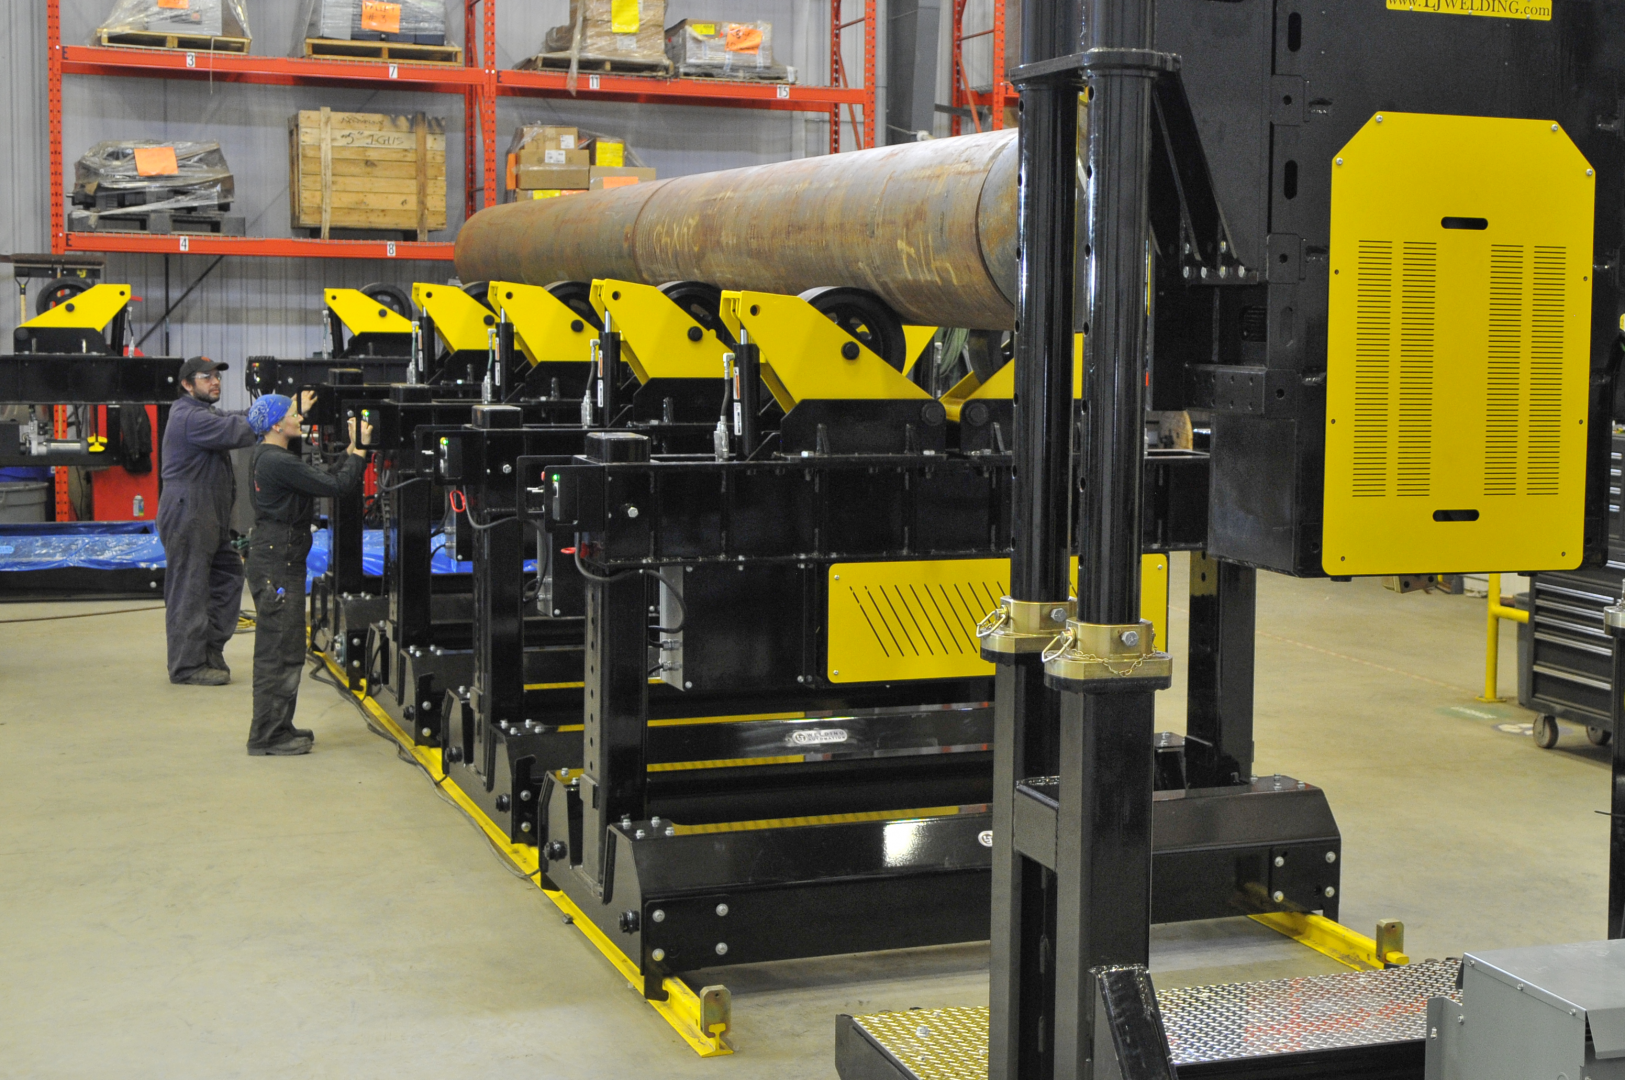 pipe and vessel material handling system for multi-purpose fabrication shops